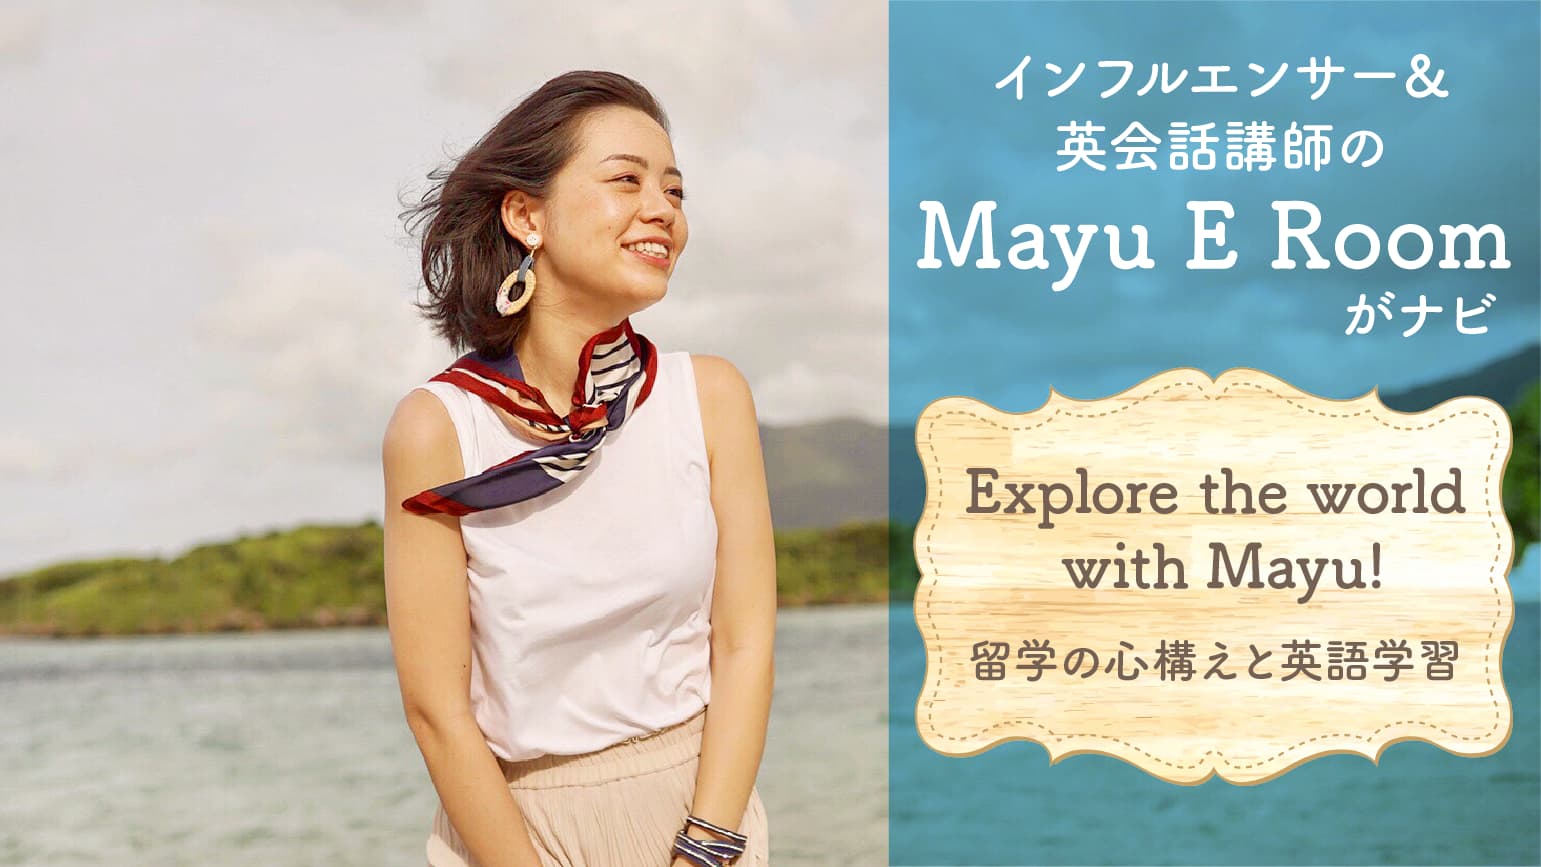 Explore the world with Mayu!